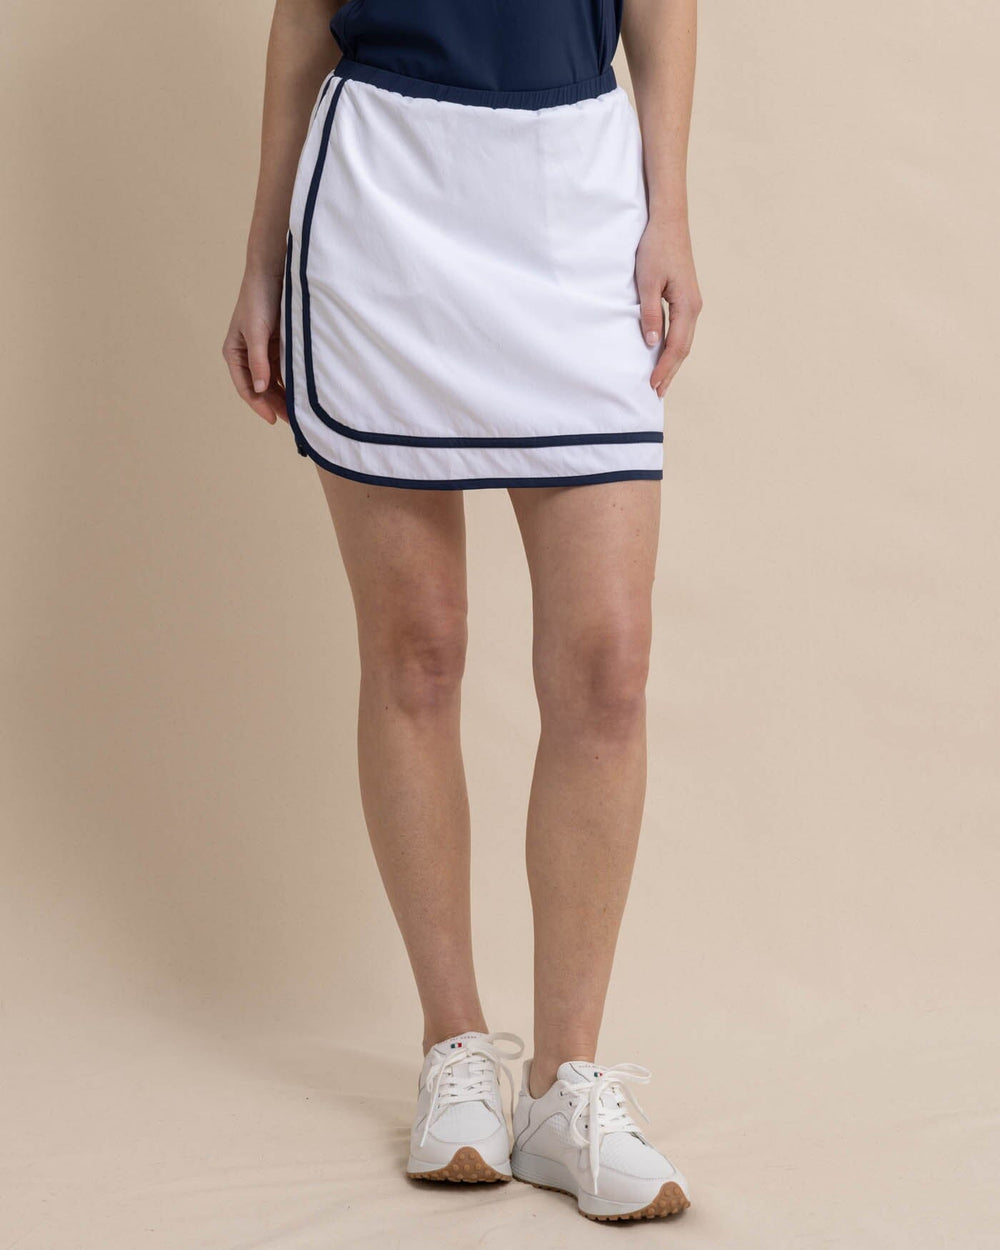 The front view of the Southern Tide Elaina Golf Skort by Southern Tide - Classic White